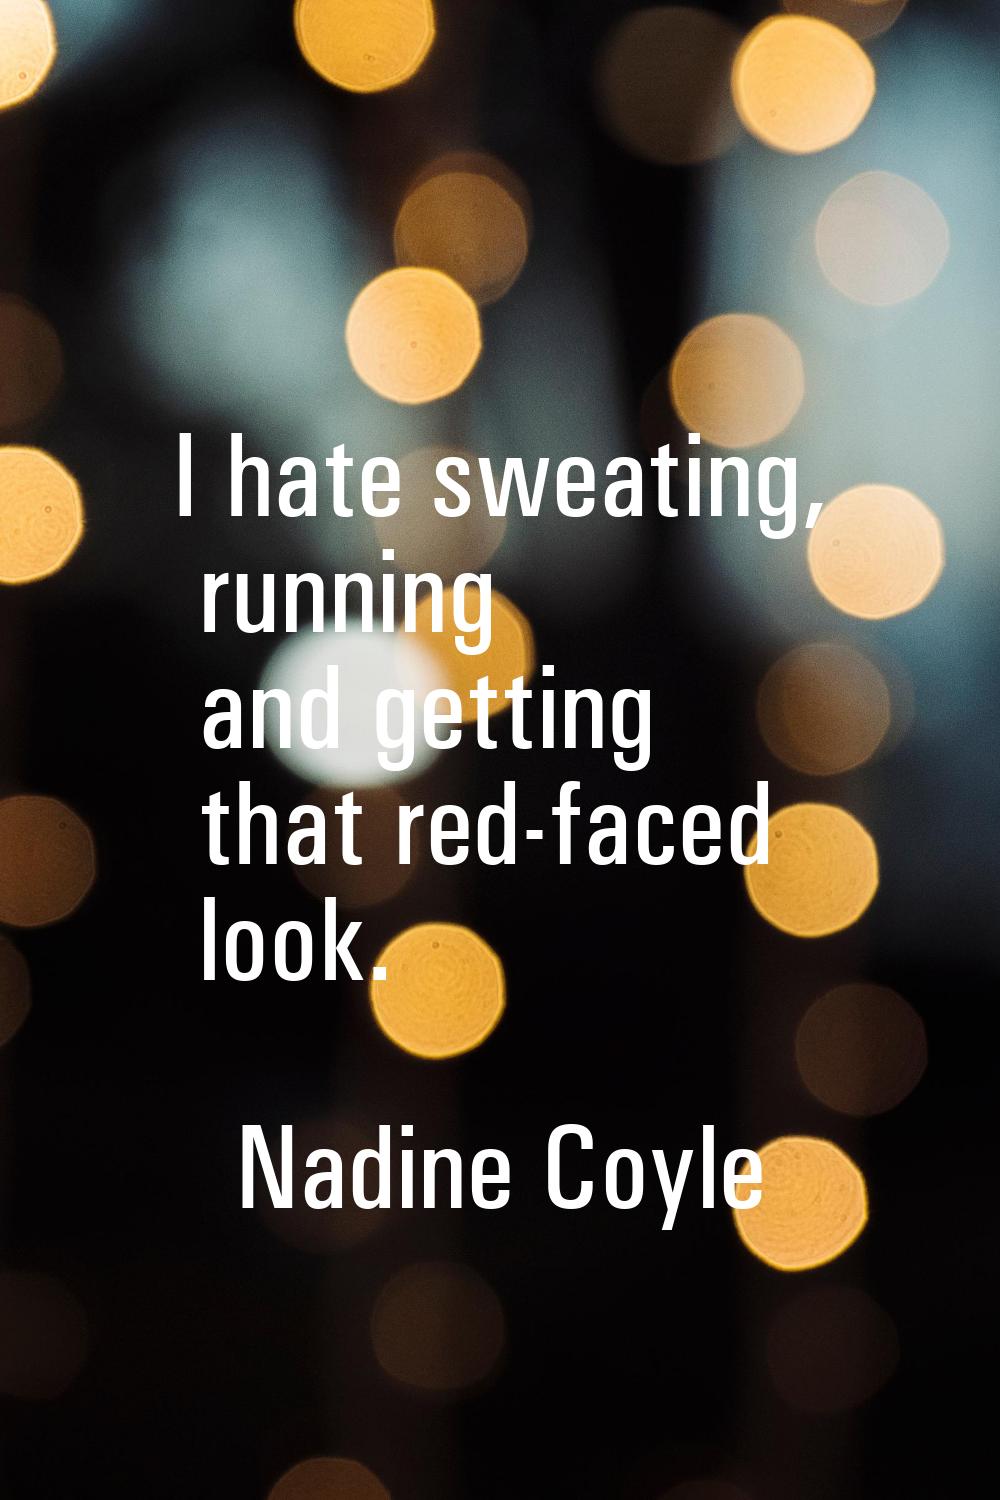 I hate sweating, running and getting that red-faced look.